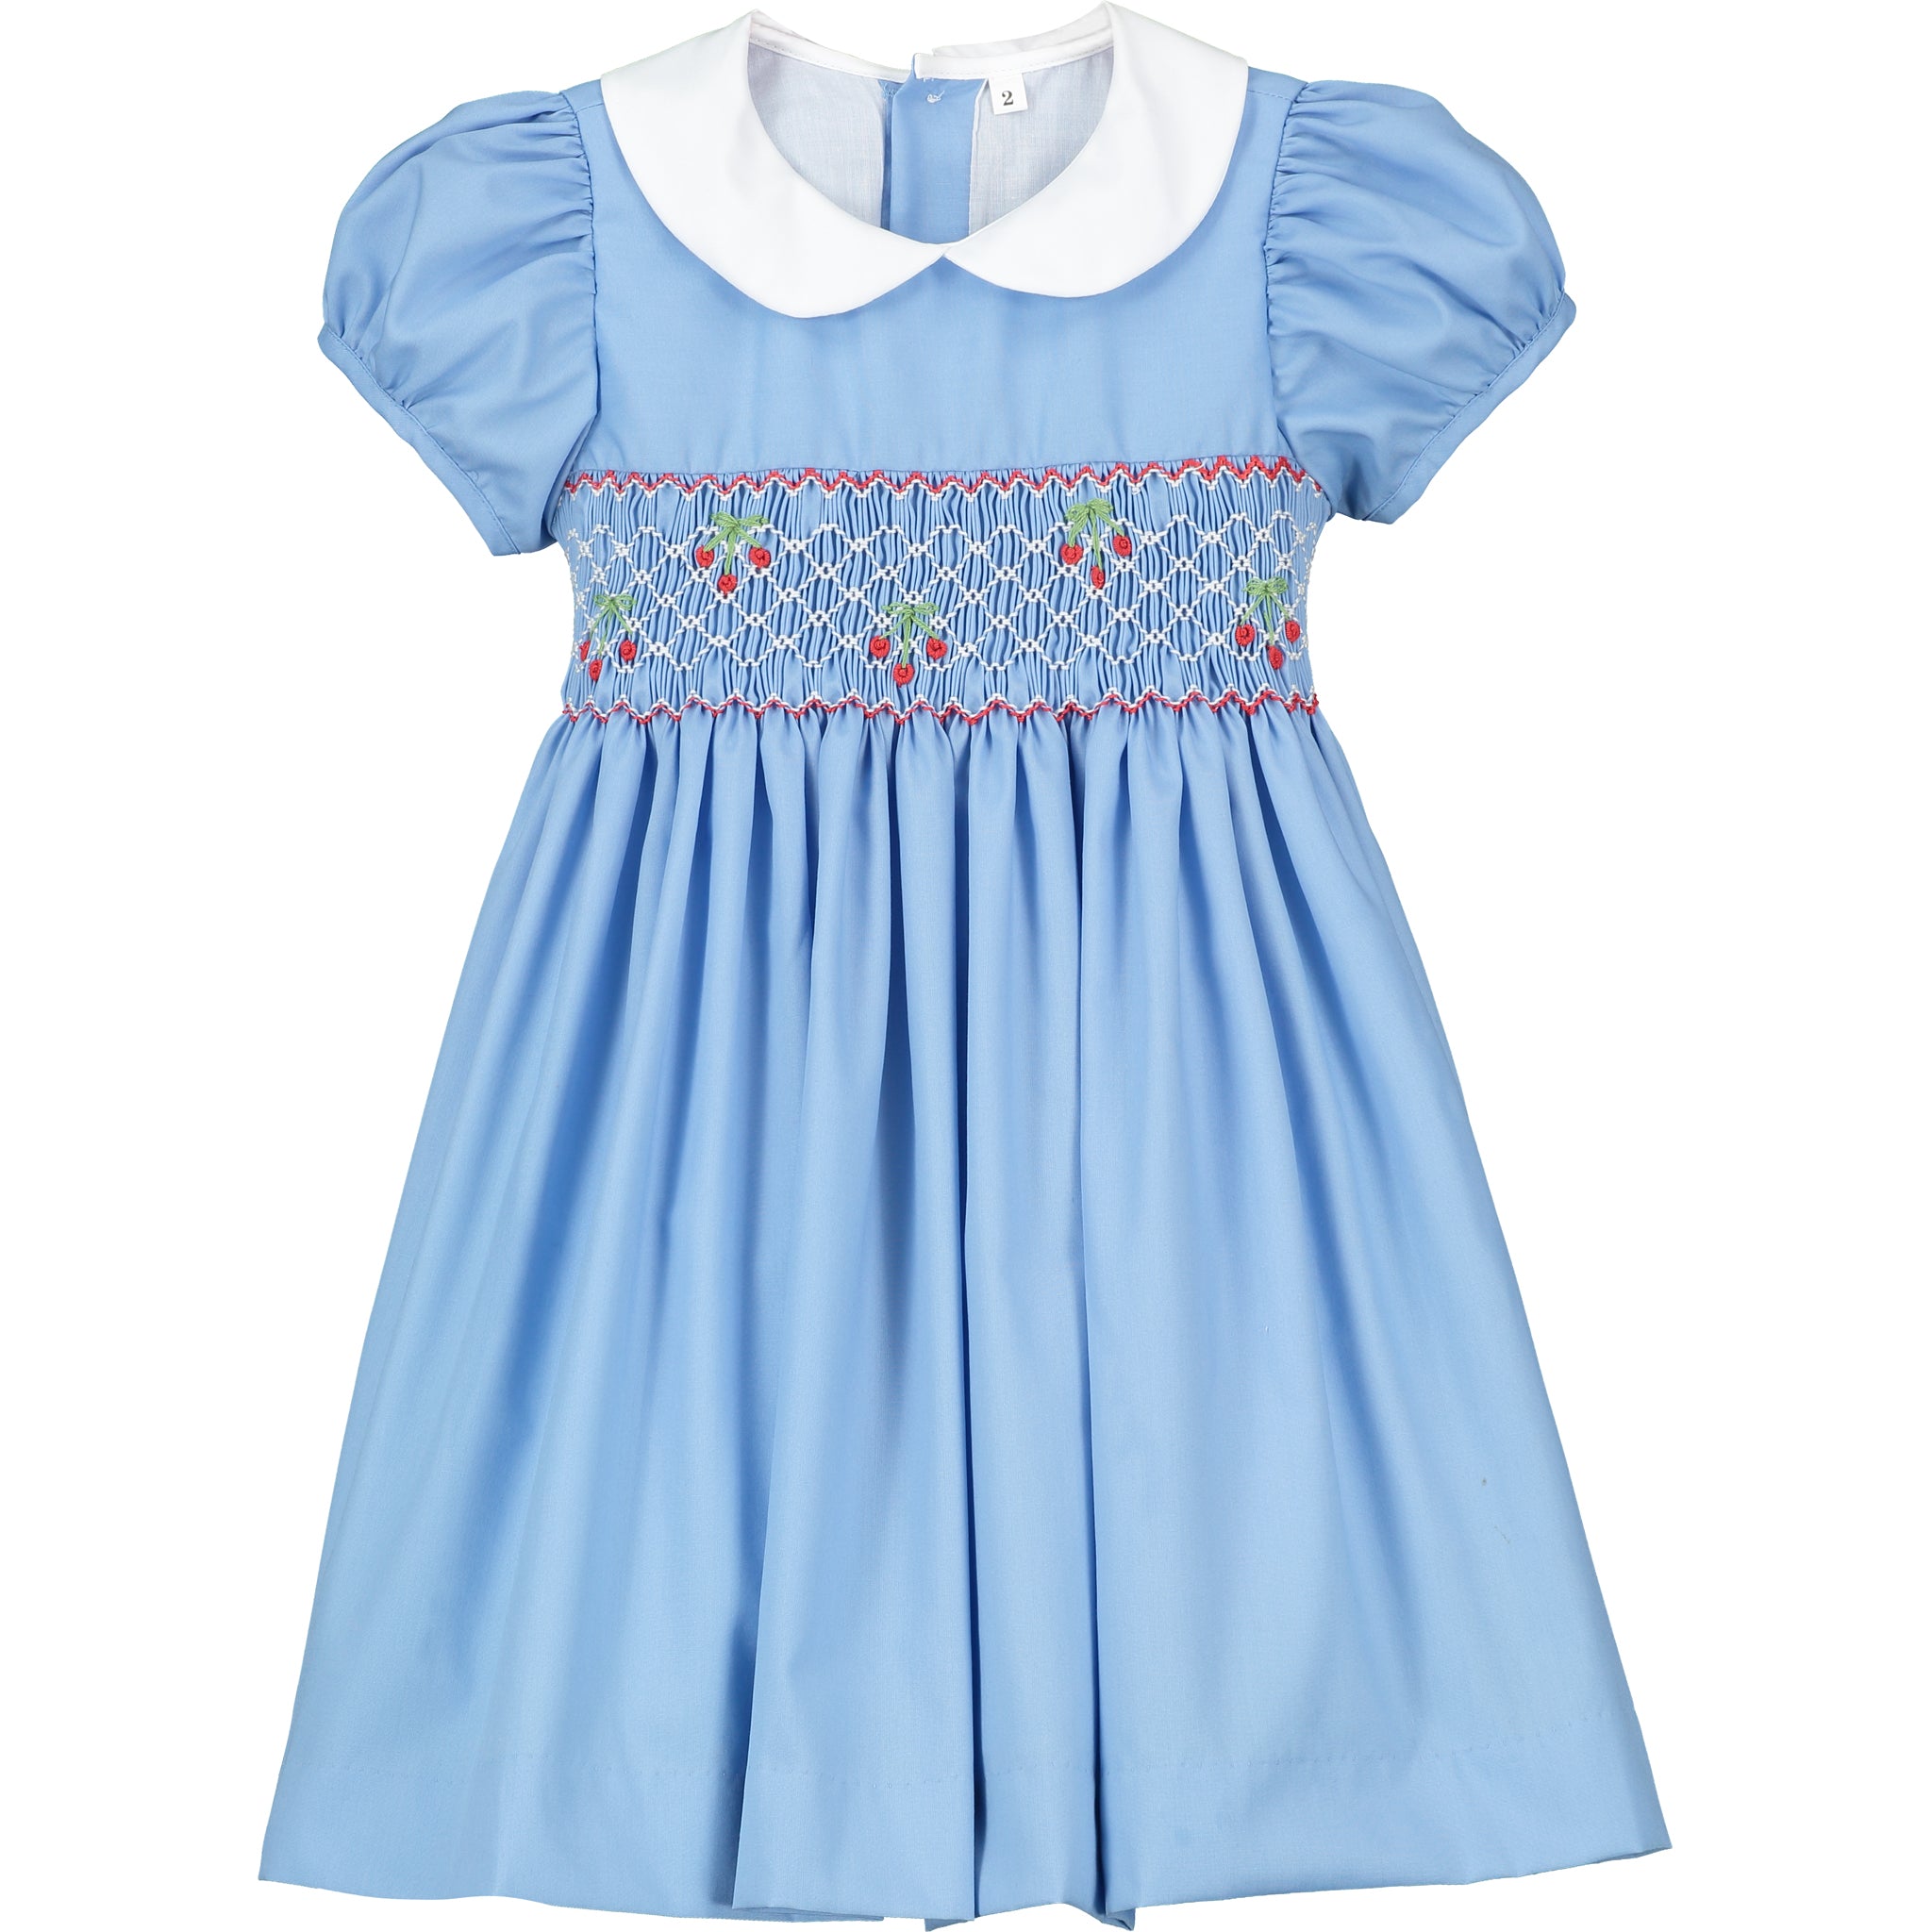 blue smocked dress with white collar, front .